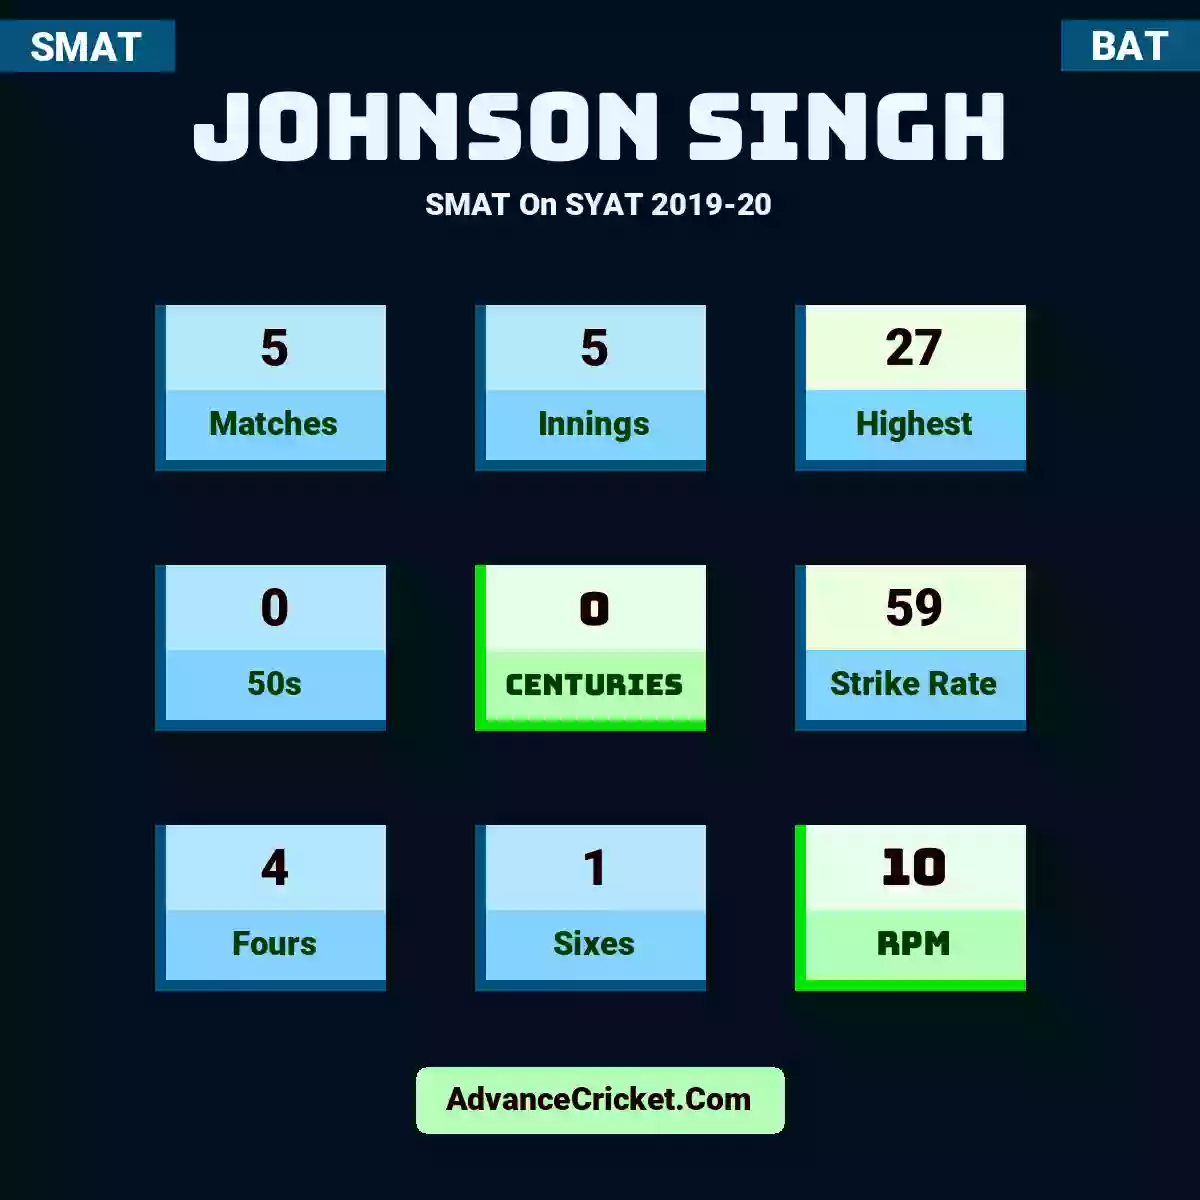 Johnson Singh SMAT  On SYAT 2019-20, Johnson Singh played 5 matches, scored 27 runs as highest, 0 half-centuries, and 0 centuries, with a strike rate of 59. J.Singh hit 4 fours and 1 sixes, with an RPM of 10.